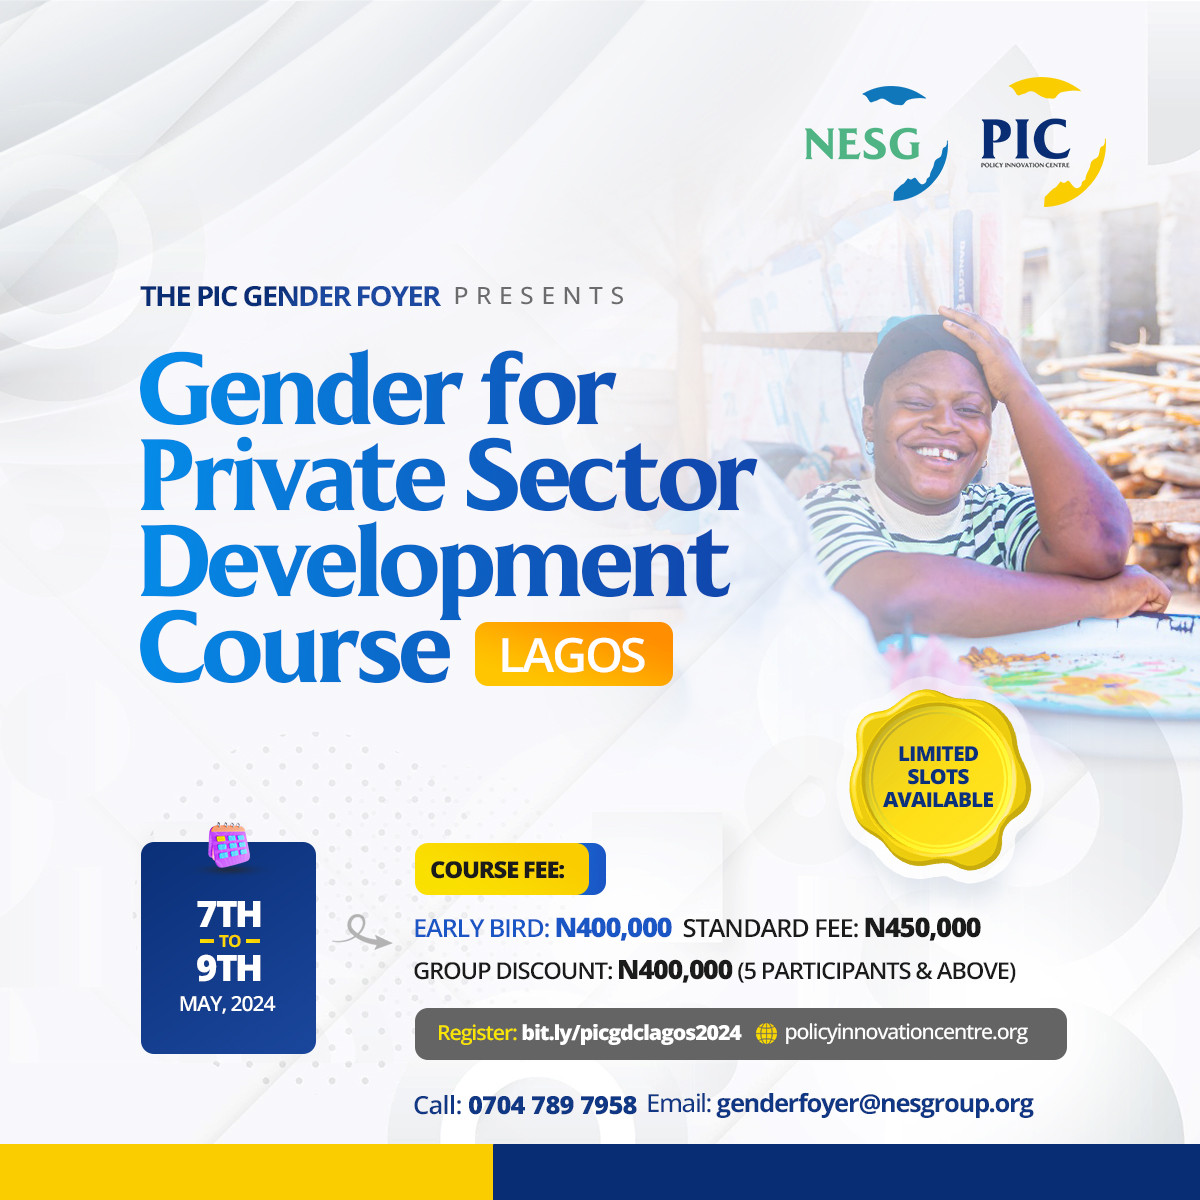 Gender for Private Sector Development Course in Lagos